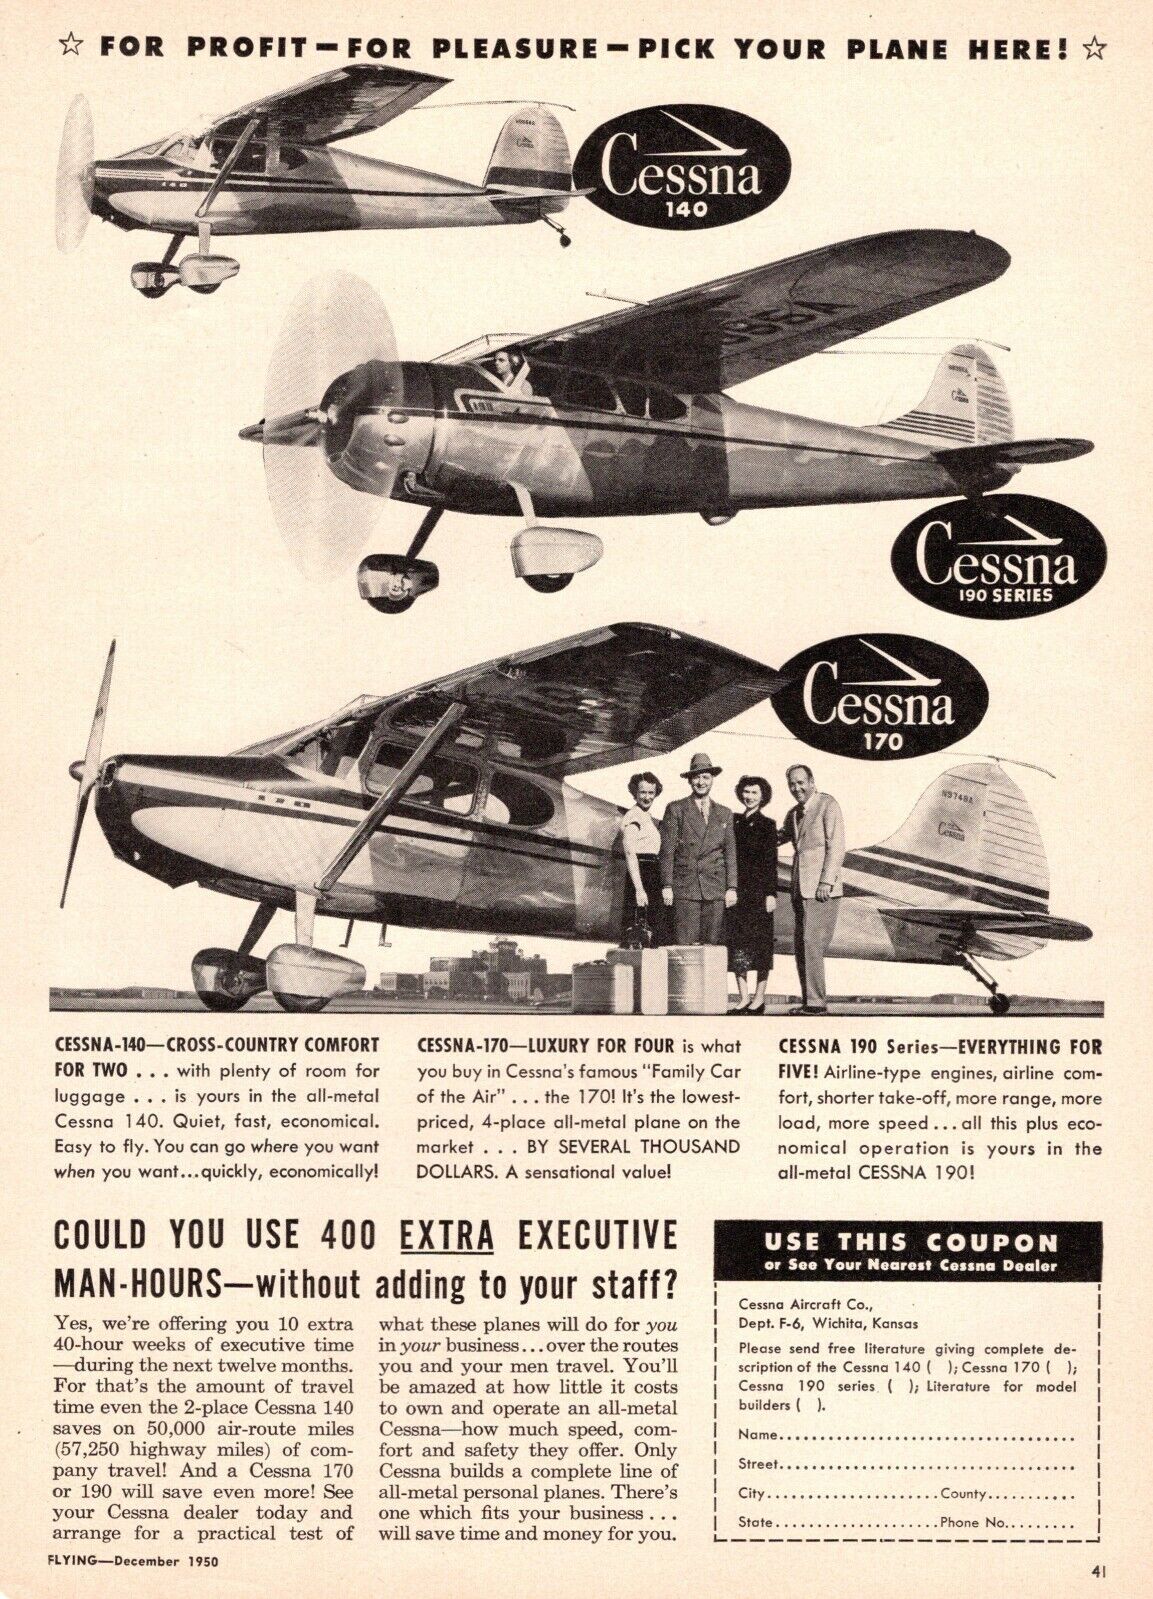 Flying Freedom: The Legacy of Cessna Aircraft